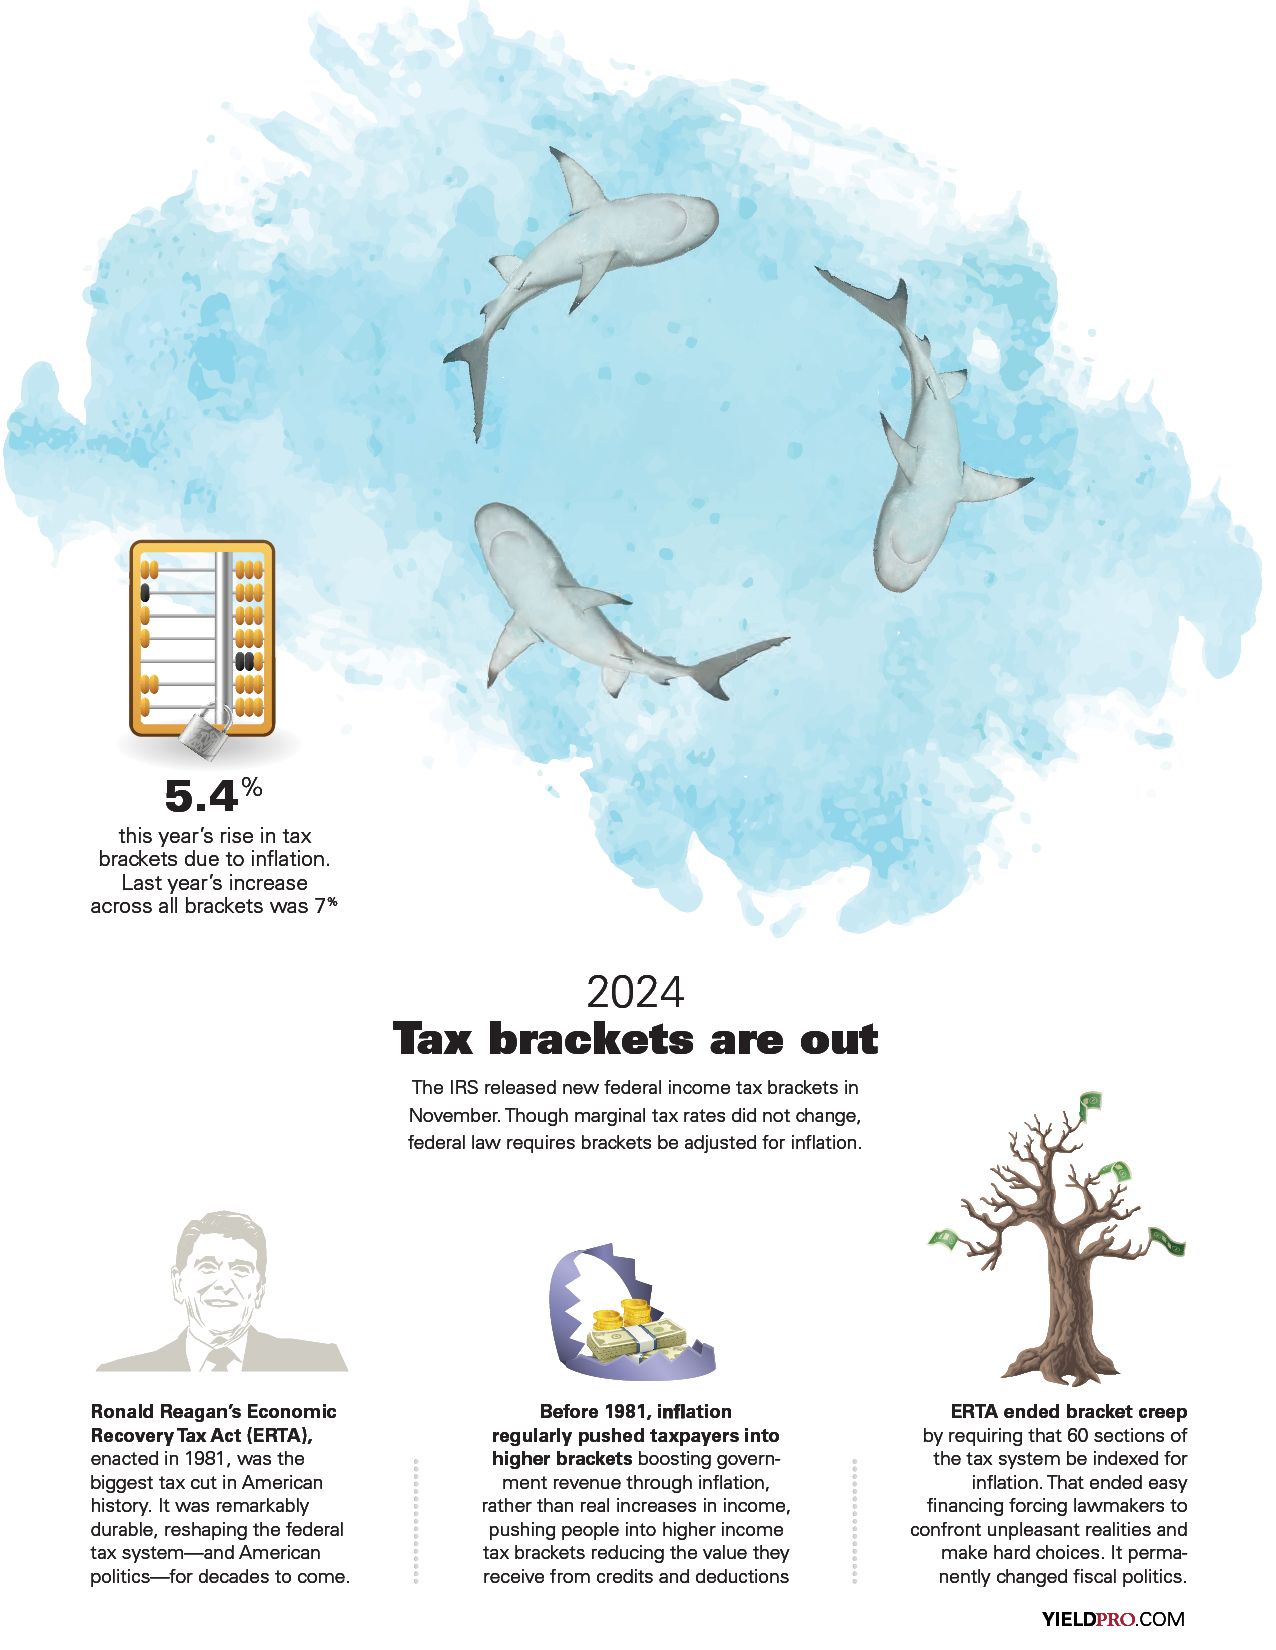 Yield-PRO-ND23-Inforgraphic-2024-Tax-brackets-are-out-01